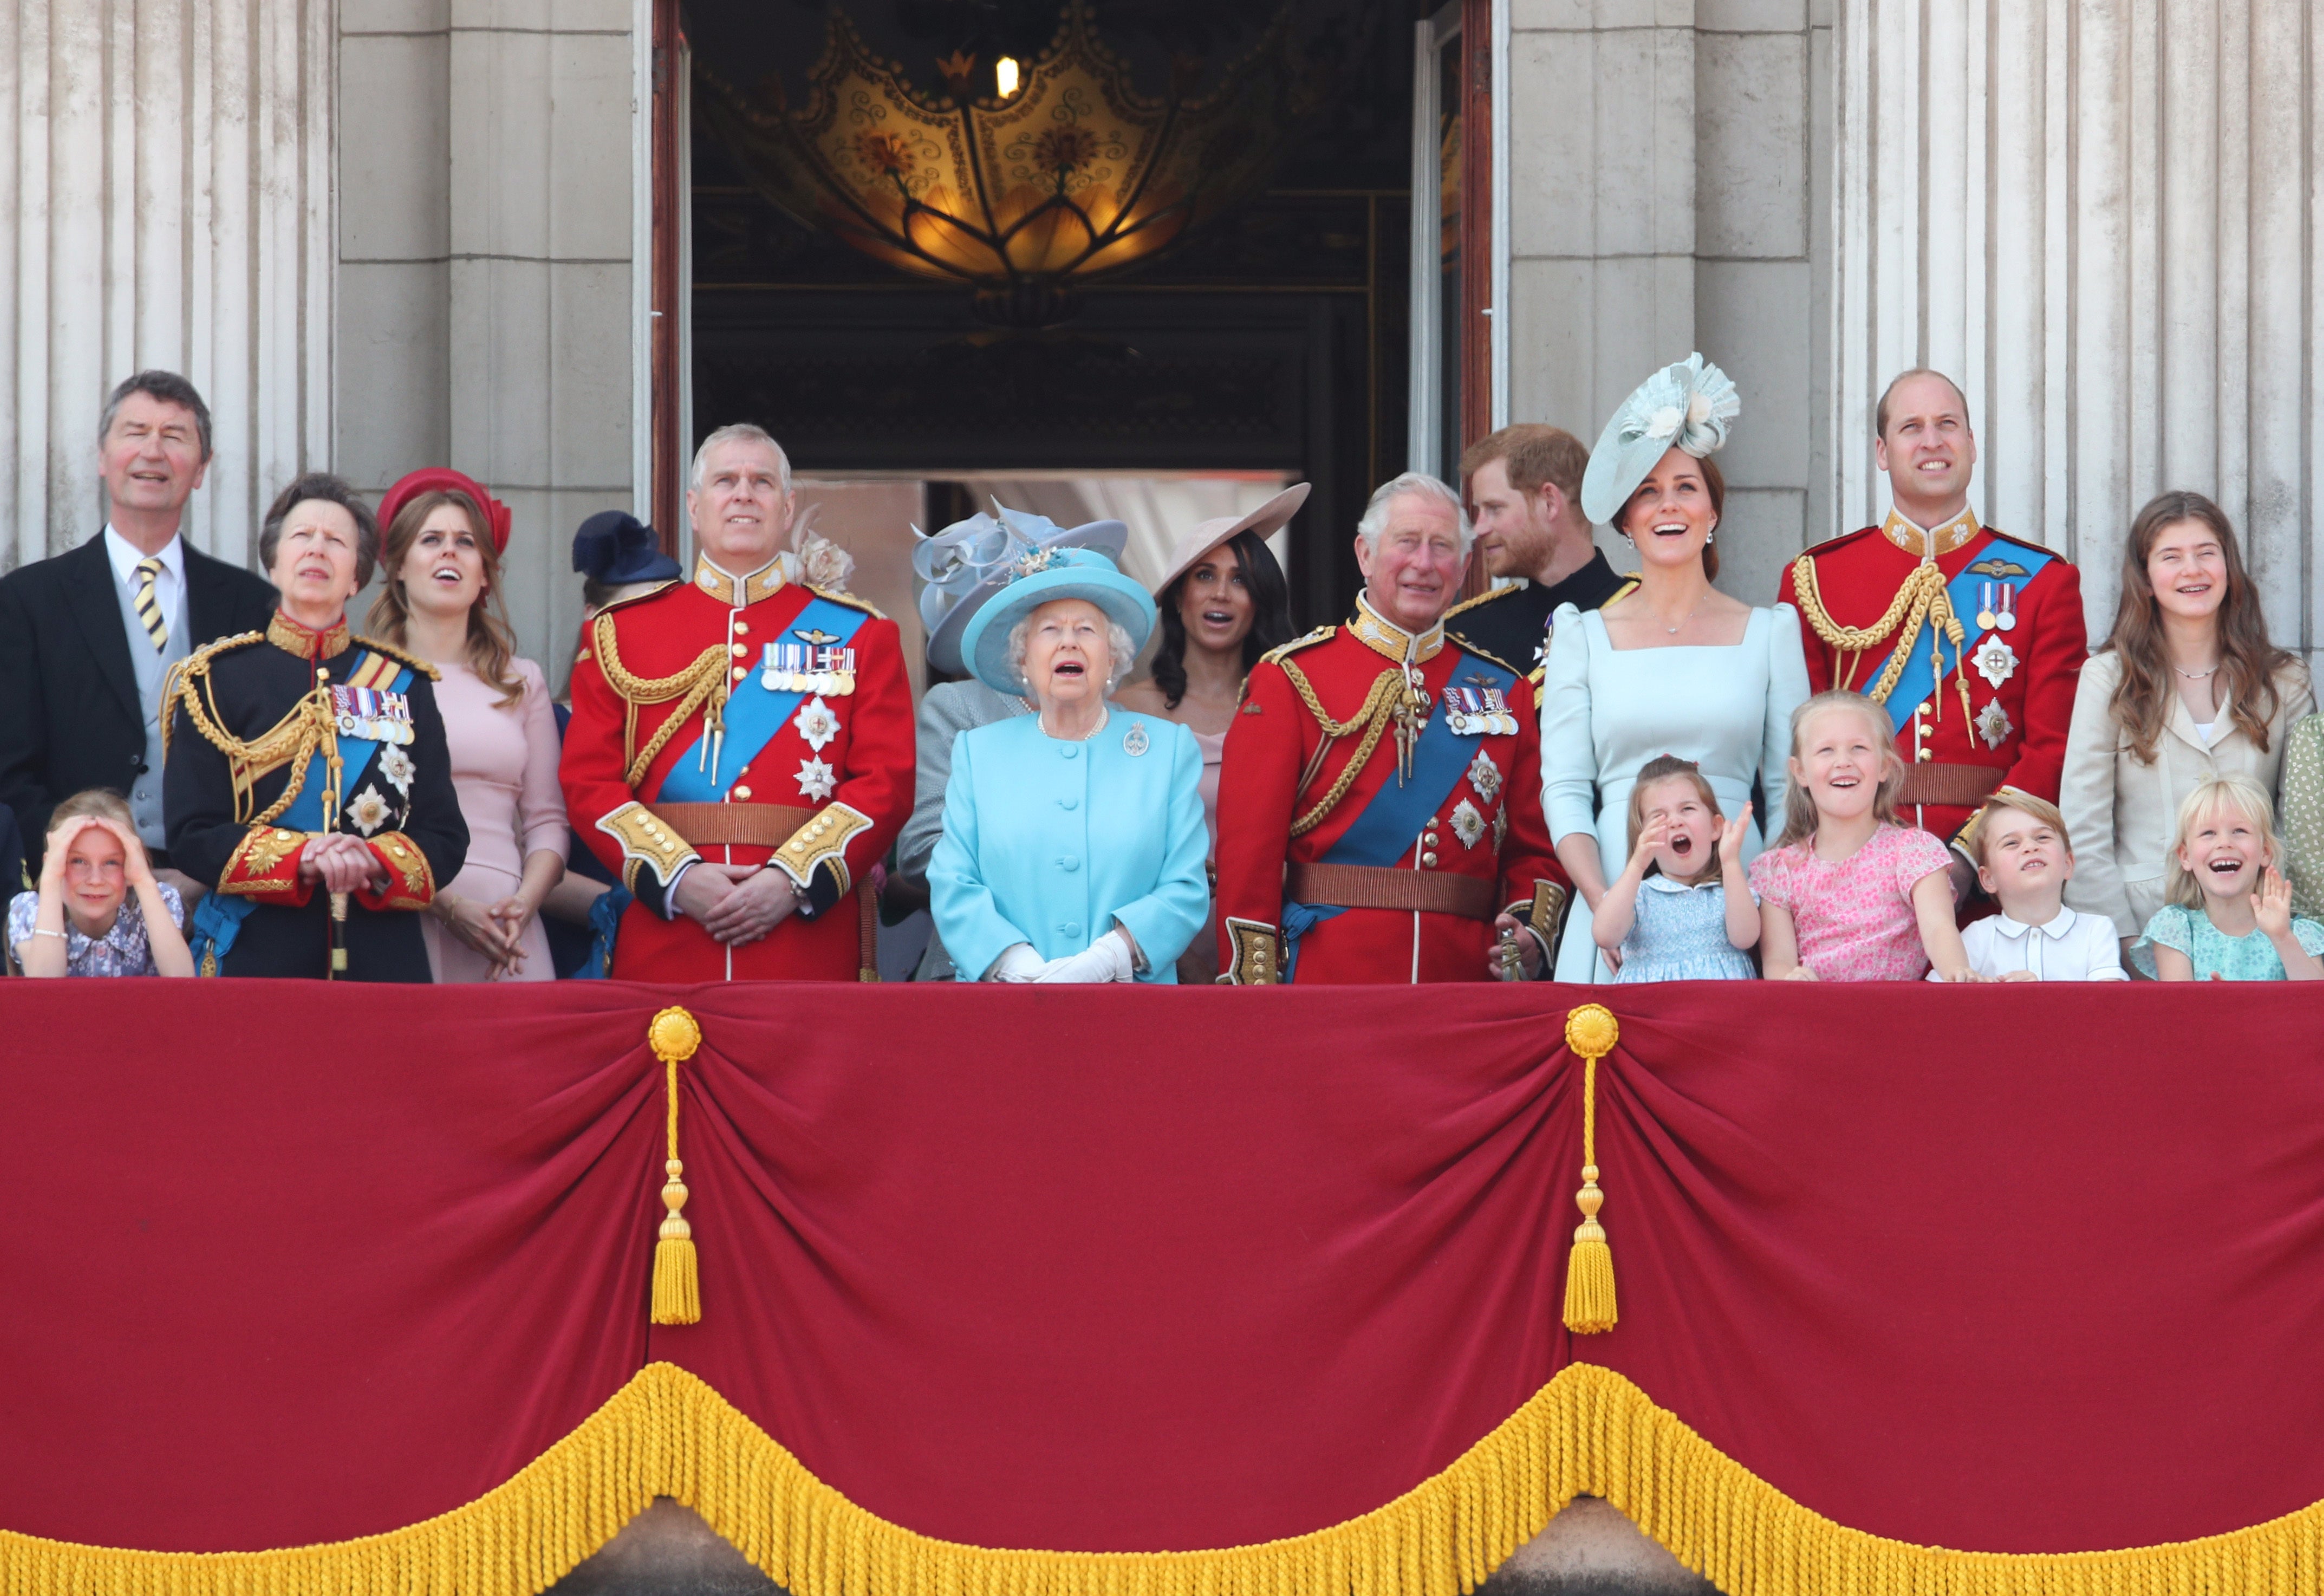 The Trooping balcony appearance in 2018